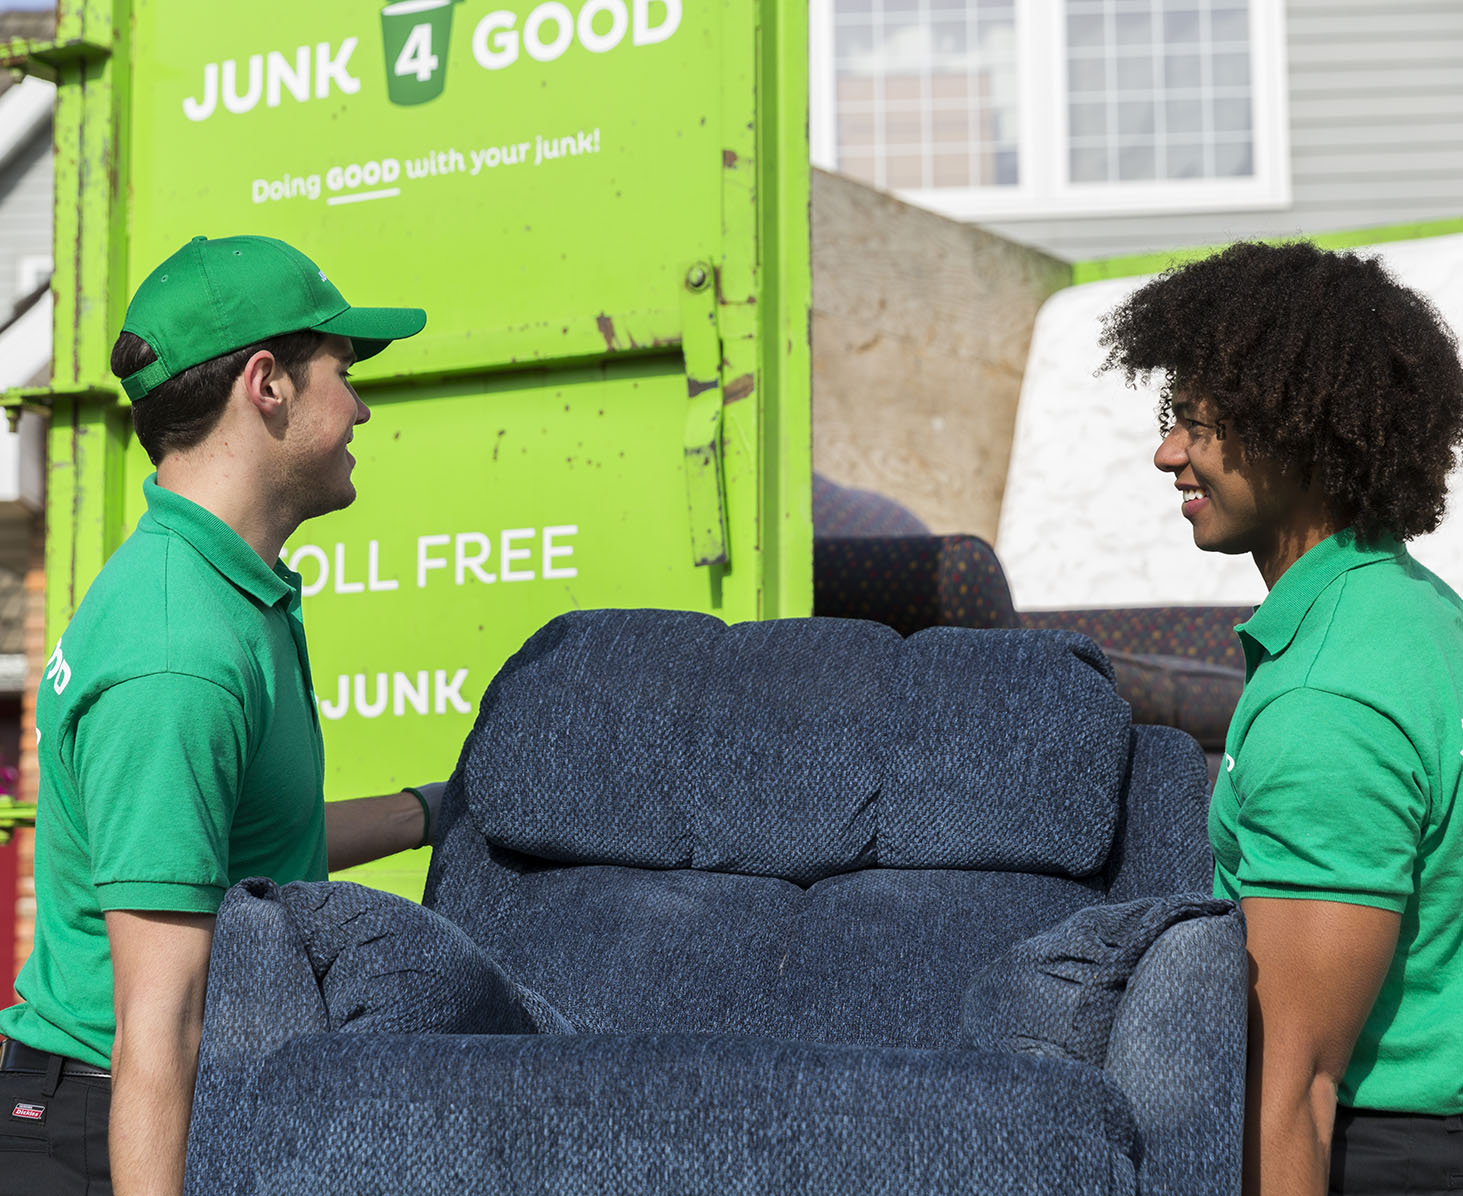 Junk 4 Good Calgary furniture removal, recycling and donations.